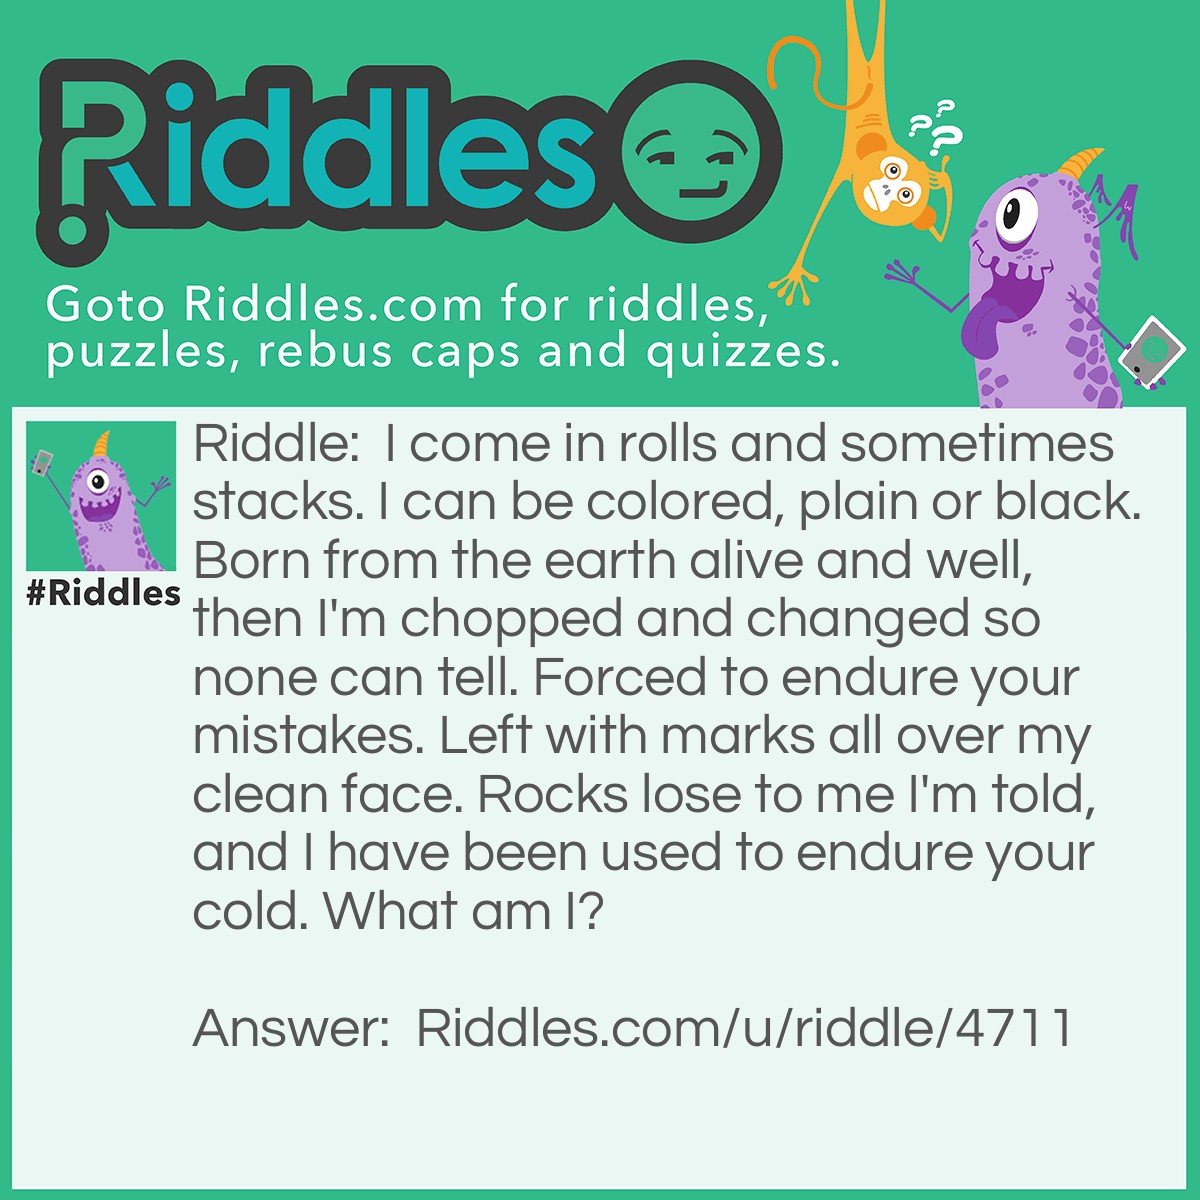 Riddle: I come in rolls and sometimes stacks. I can be colored, plain or black. Born from the earth alive and well, then I'm chopped and changed so none can tell. Forced to endure your mistakes. Left with marks all over my clean face. Rocks lose to me I'm told, and I have been used to endure your cold. What am I? Answer: Paper.